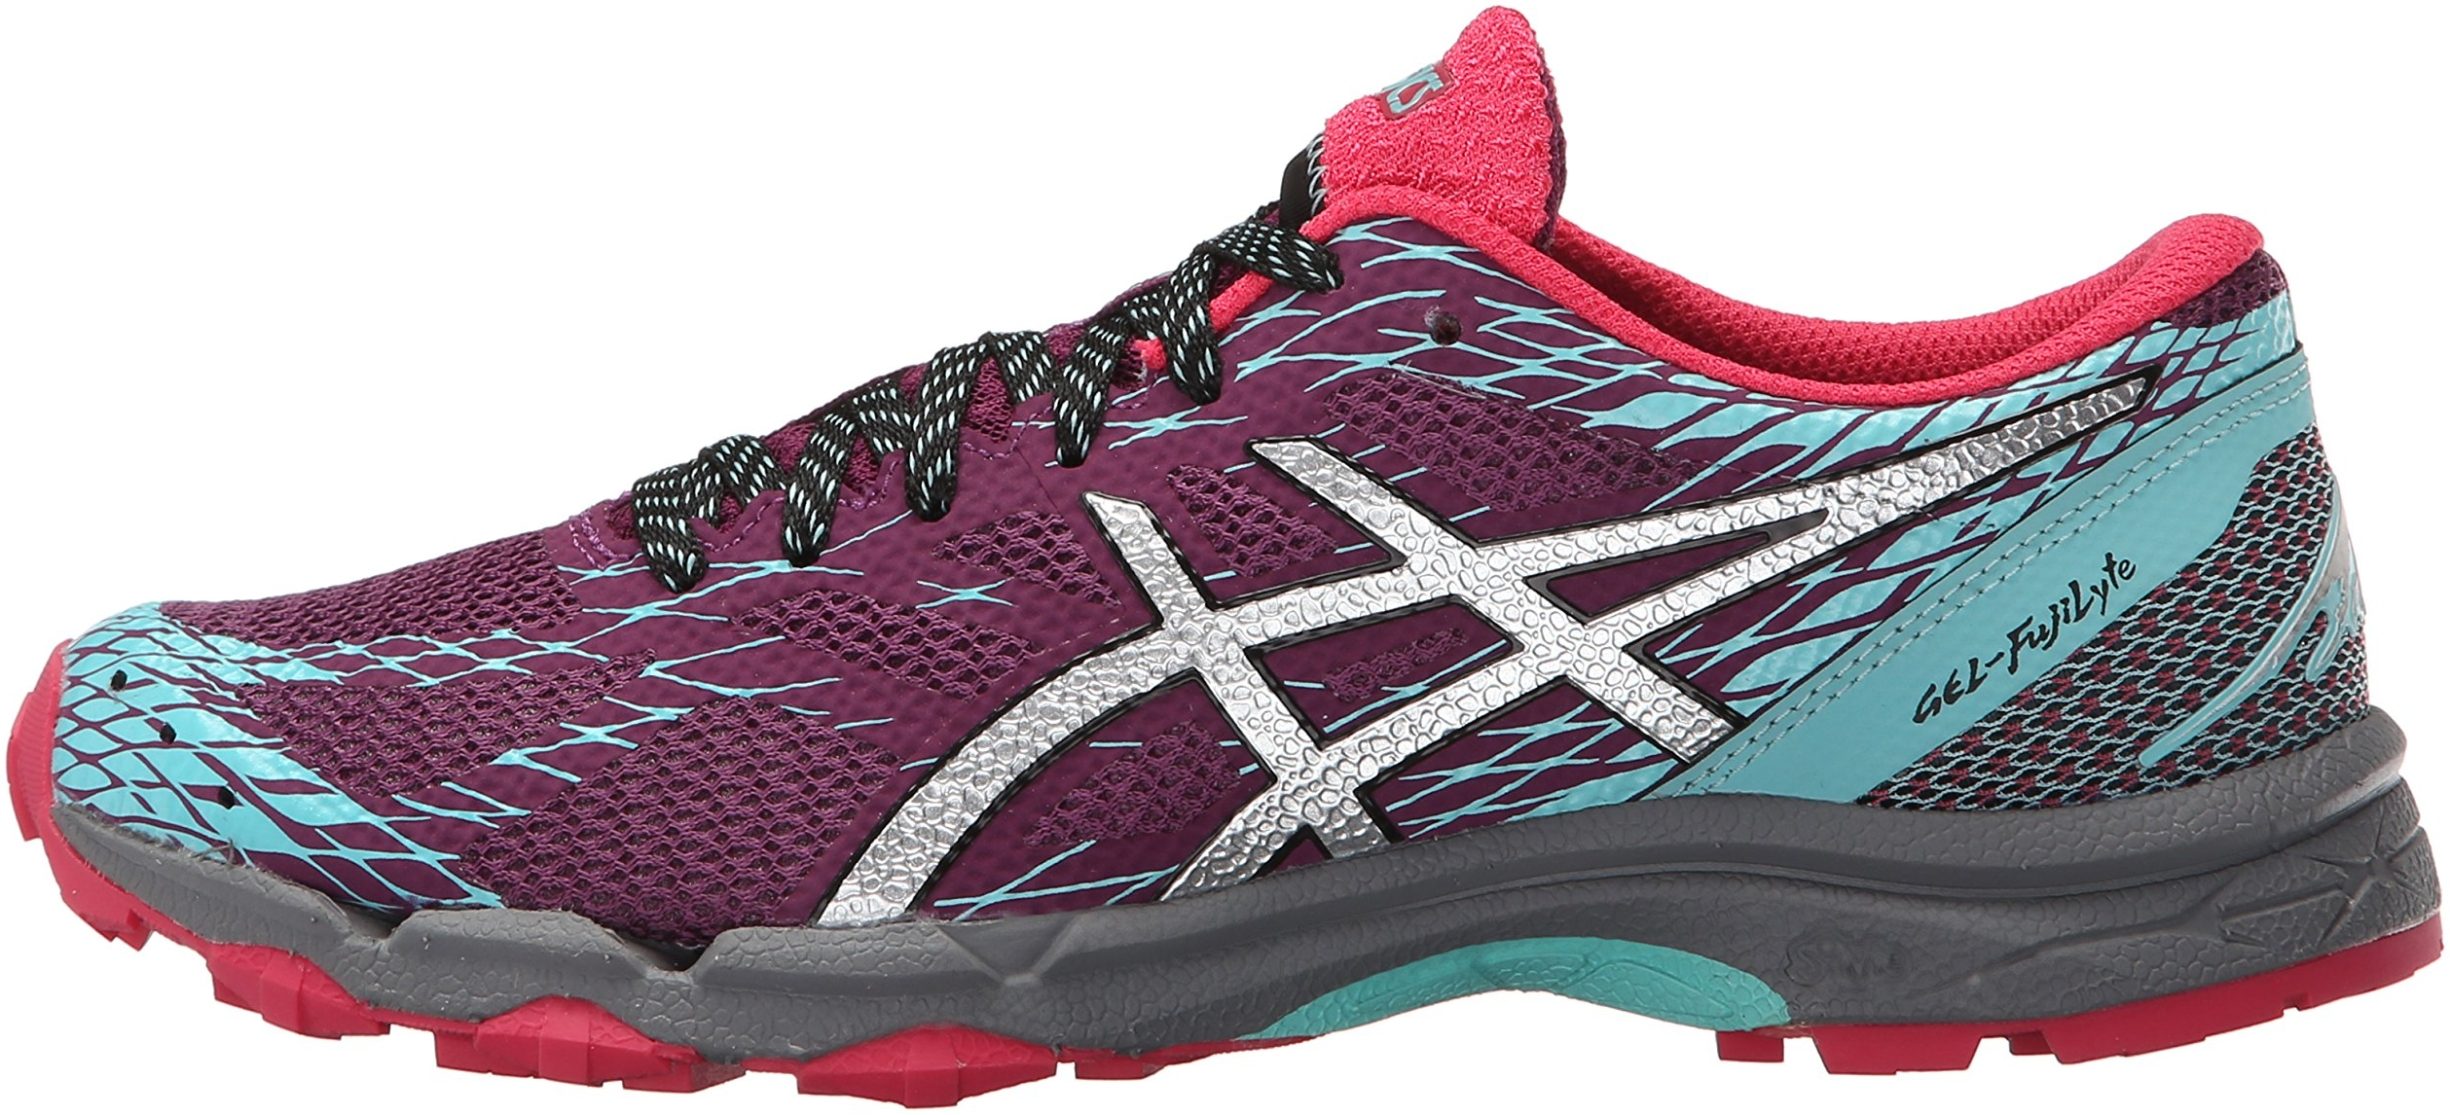 Only $92 + Review of Asics Gel FujiLyte | RunRepeat